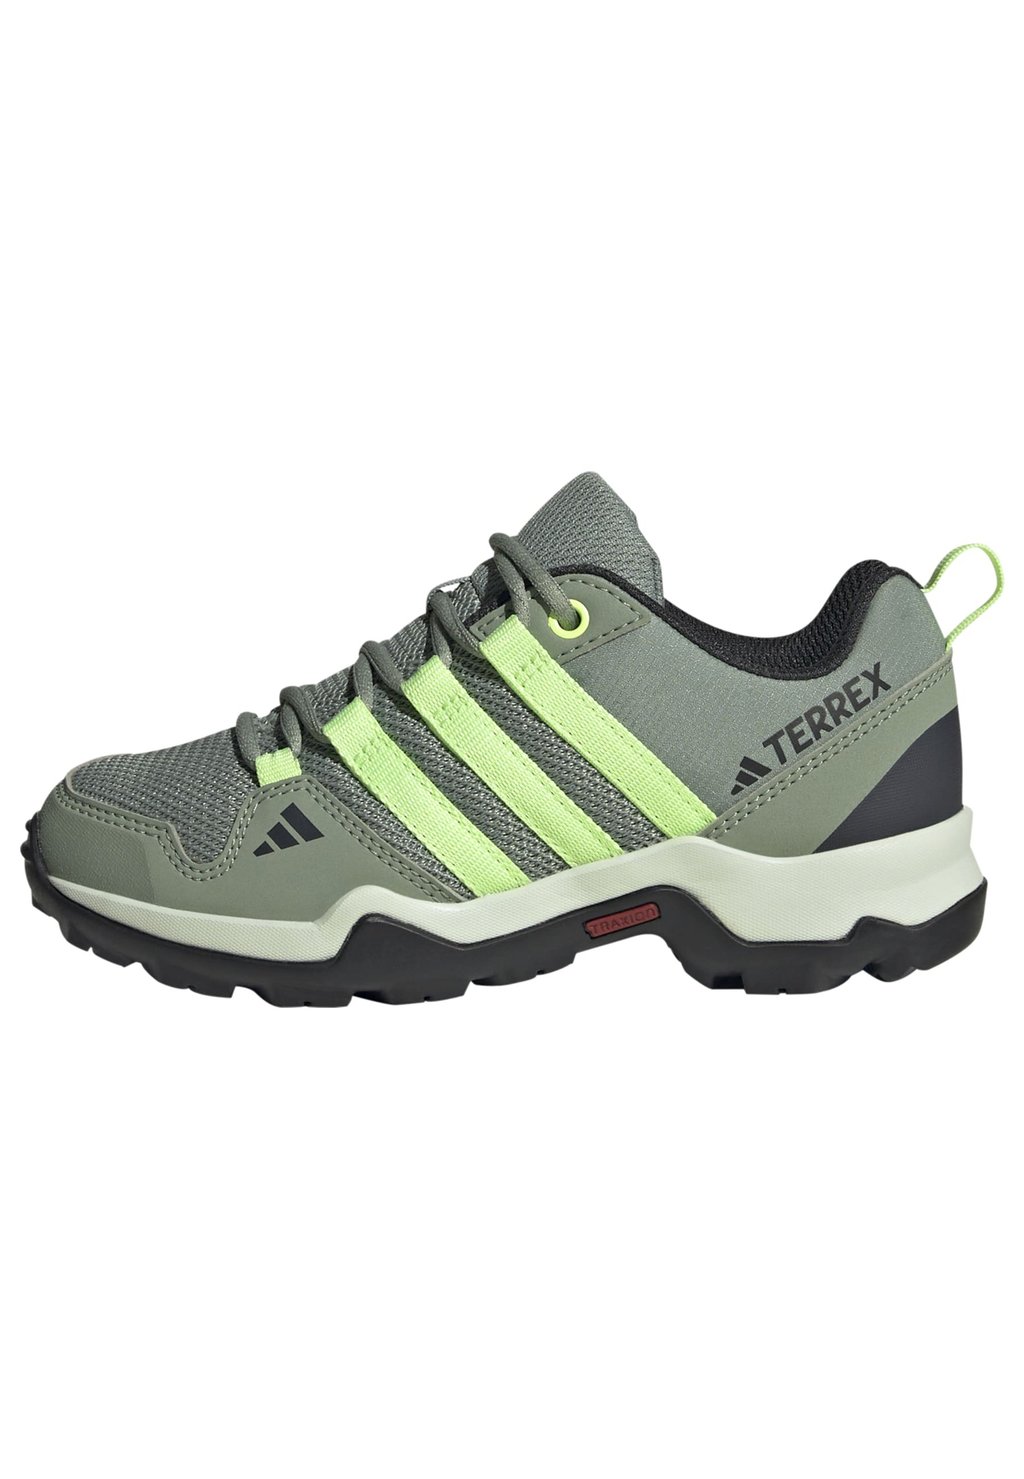 Кроссовки AX2R Adidas Terrex, цвет silver green/green spark/crystal jade kjjeaxcmy boutique jewelry s925 pure silver white yellow green chalcedony pomegranate red jade silver antique simple